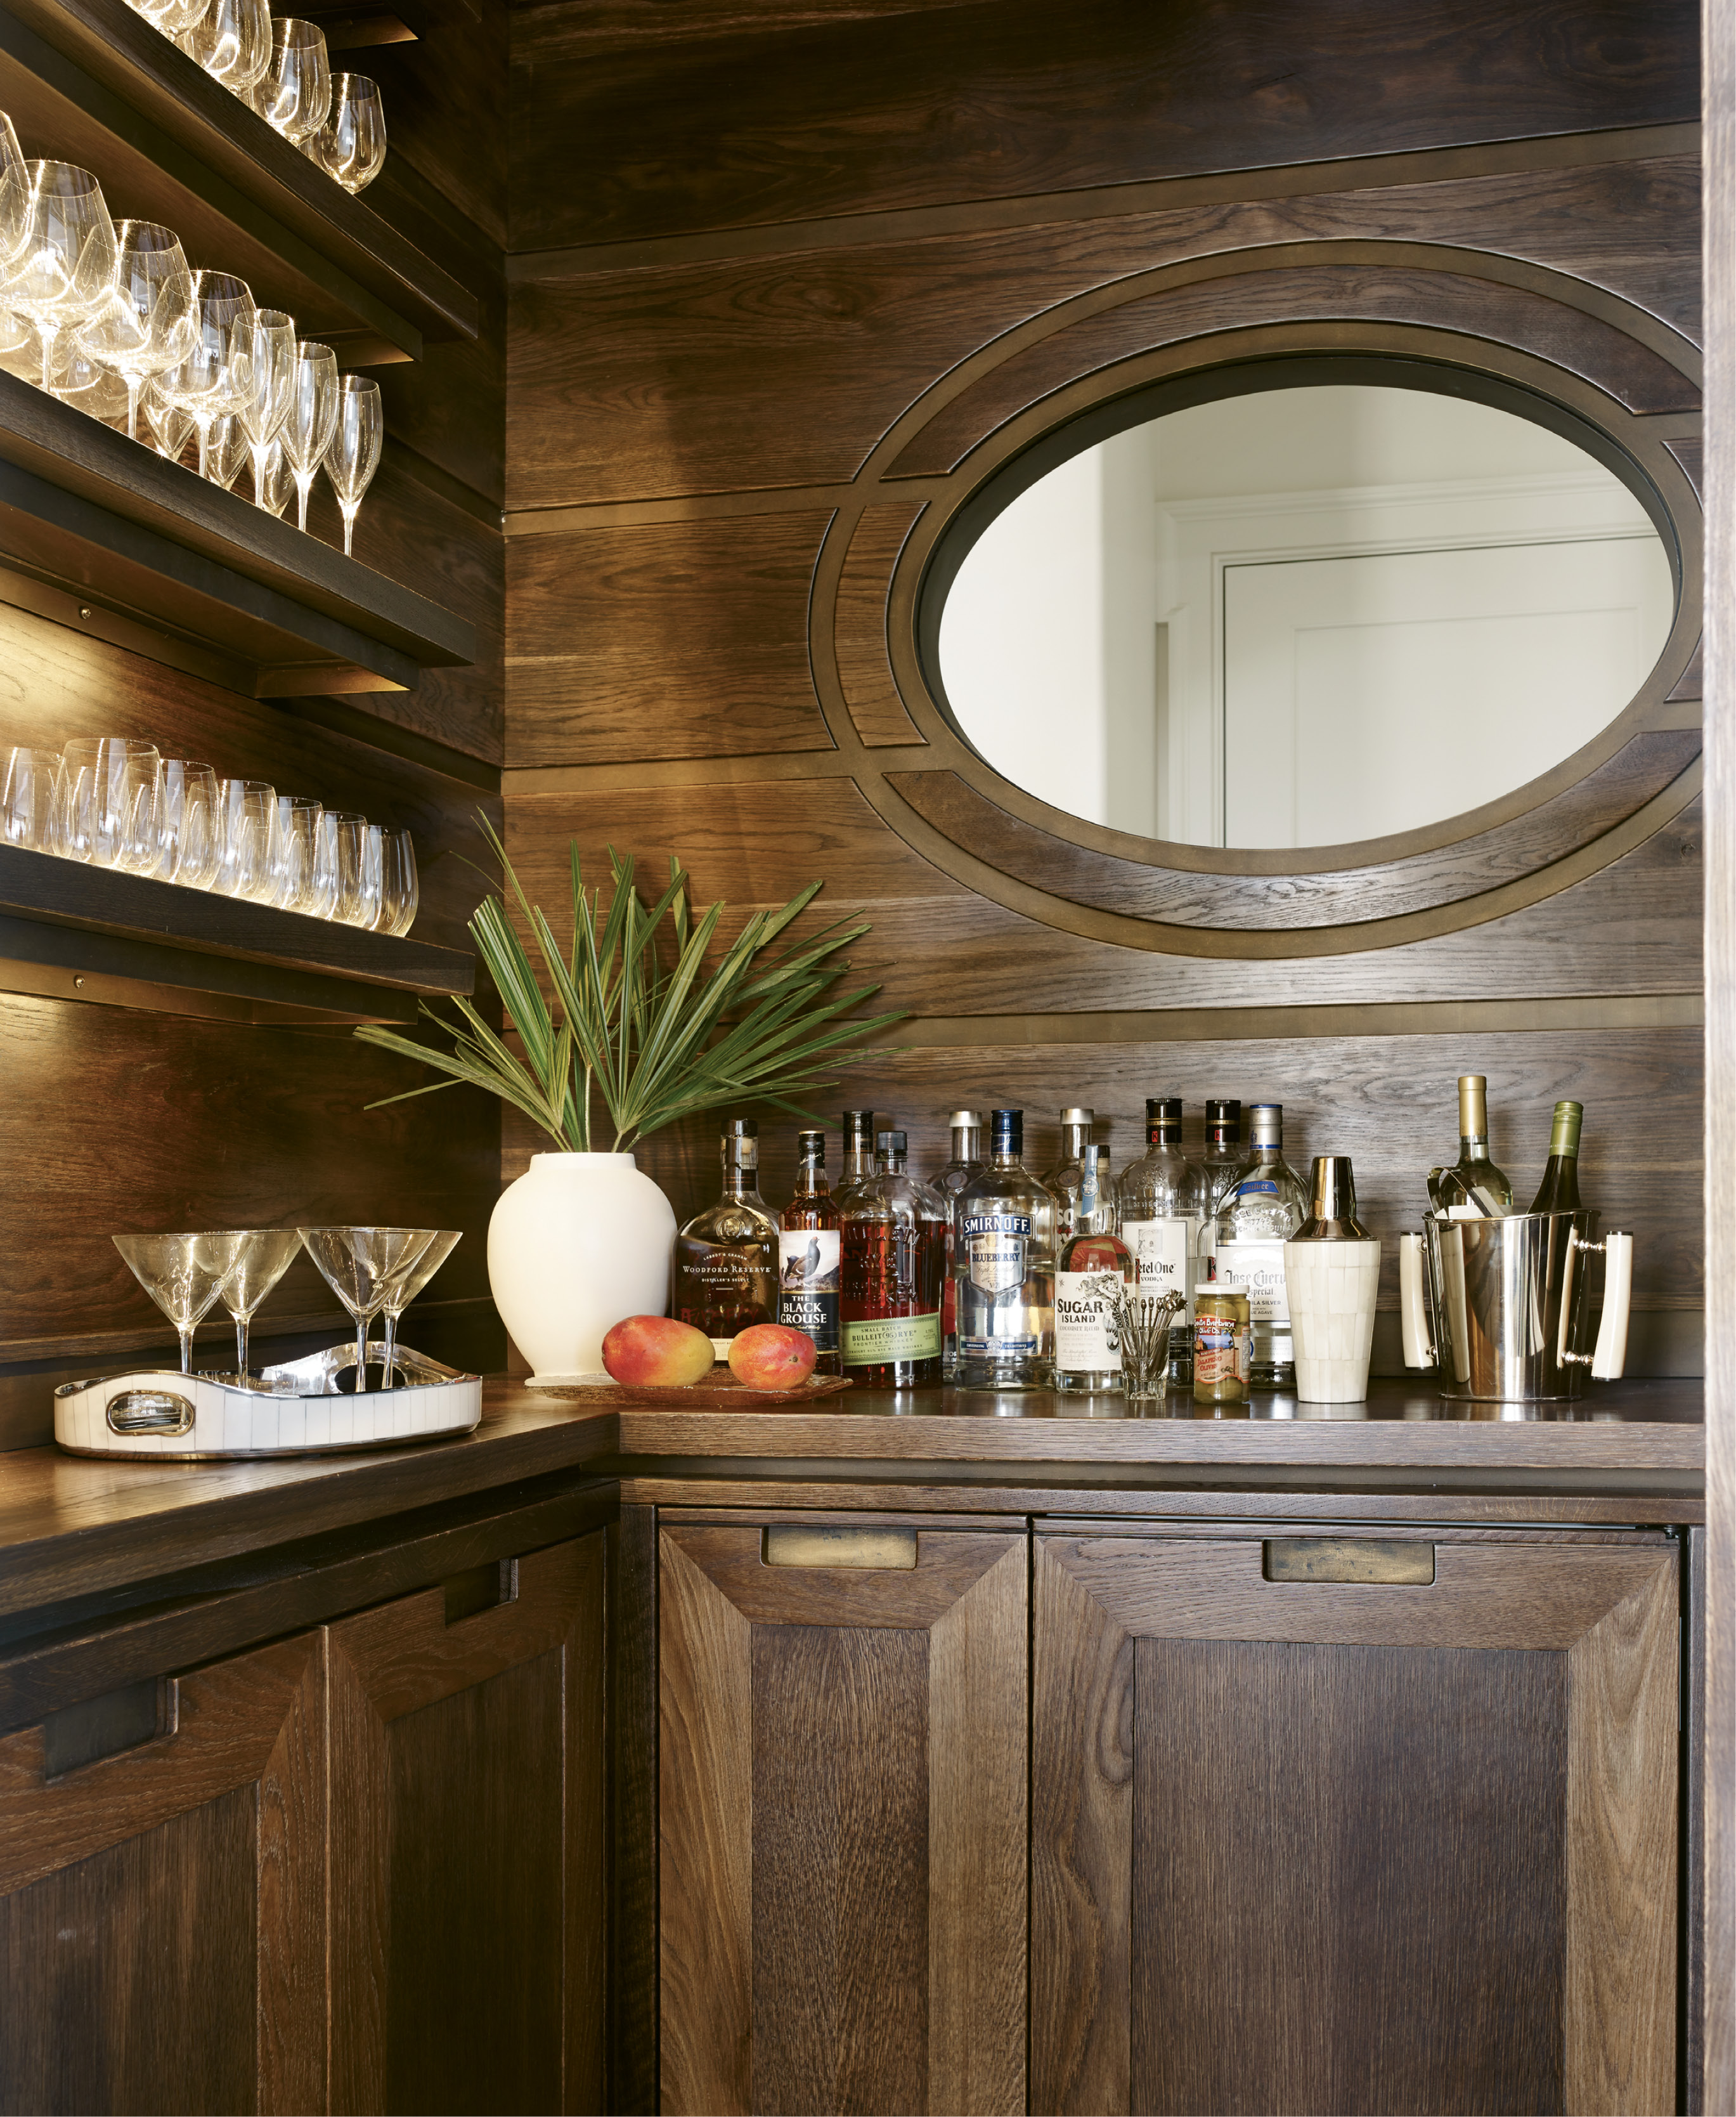 Custom cypress cabinetry by local firm ECR Joinery and an oval-shaped interior window distinguish the bar, which separates the kitchen and living room.